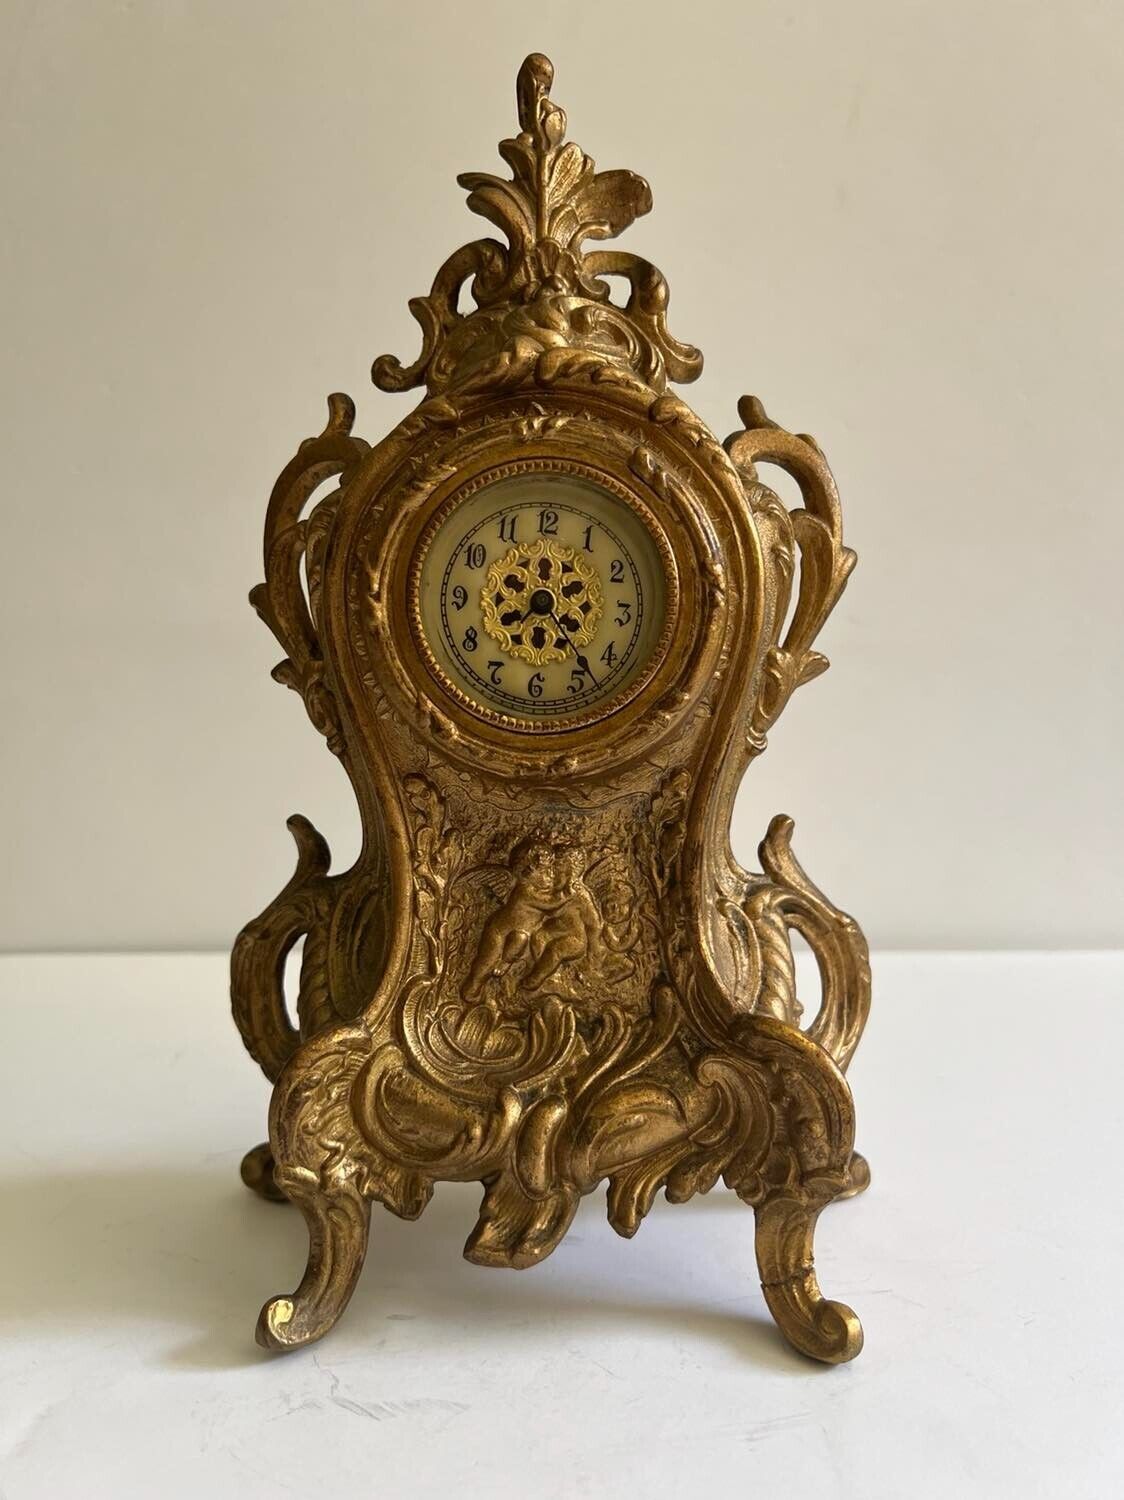 Vintage Gold Over Cast Iron Mantle Clock The clock doesn't work